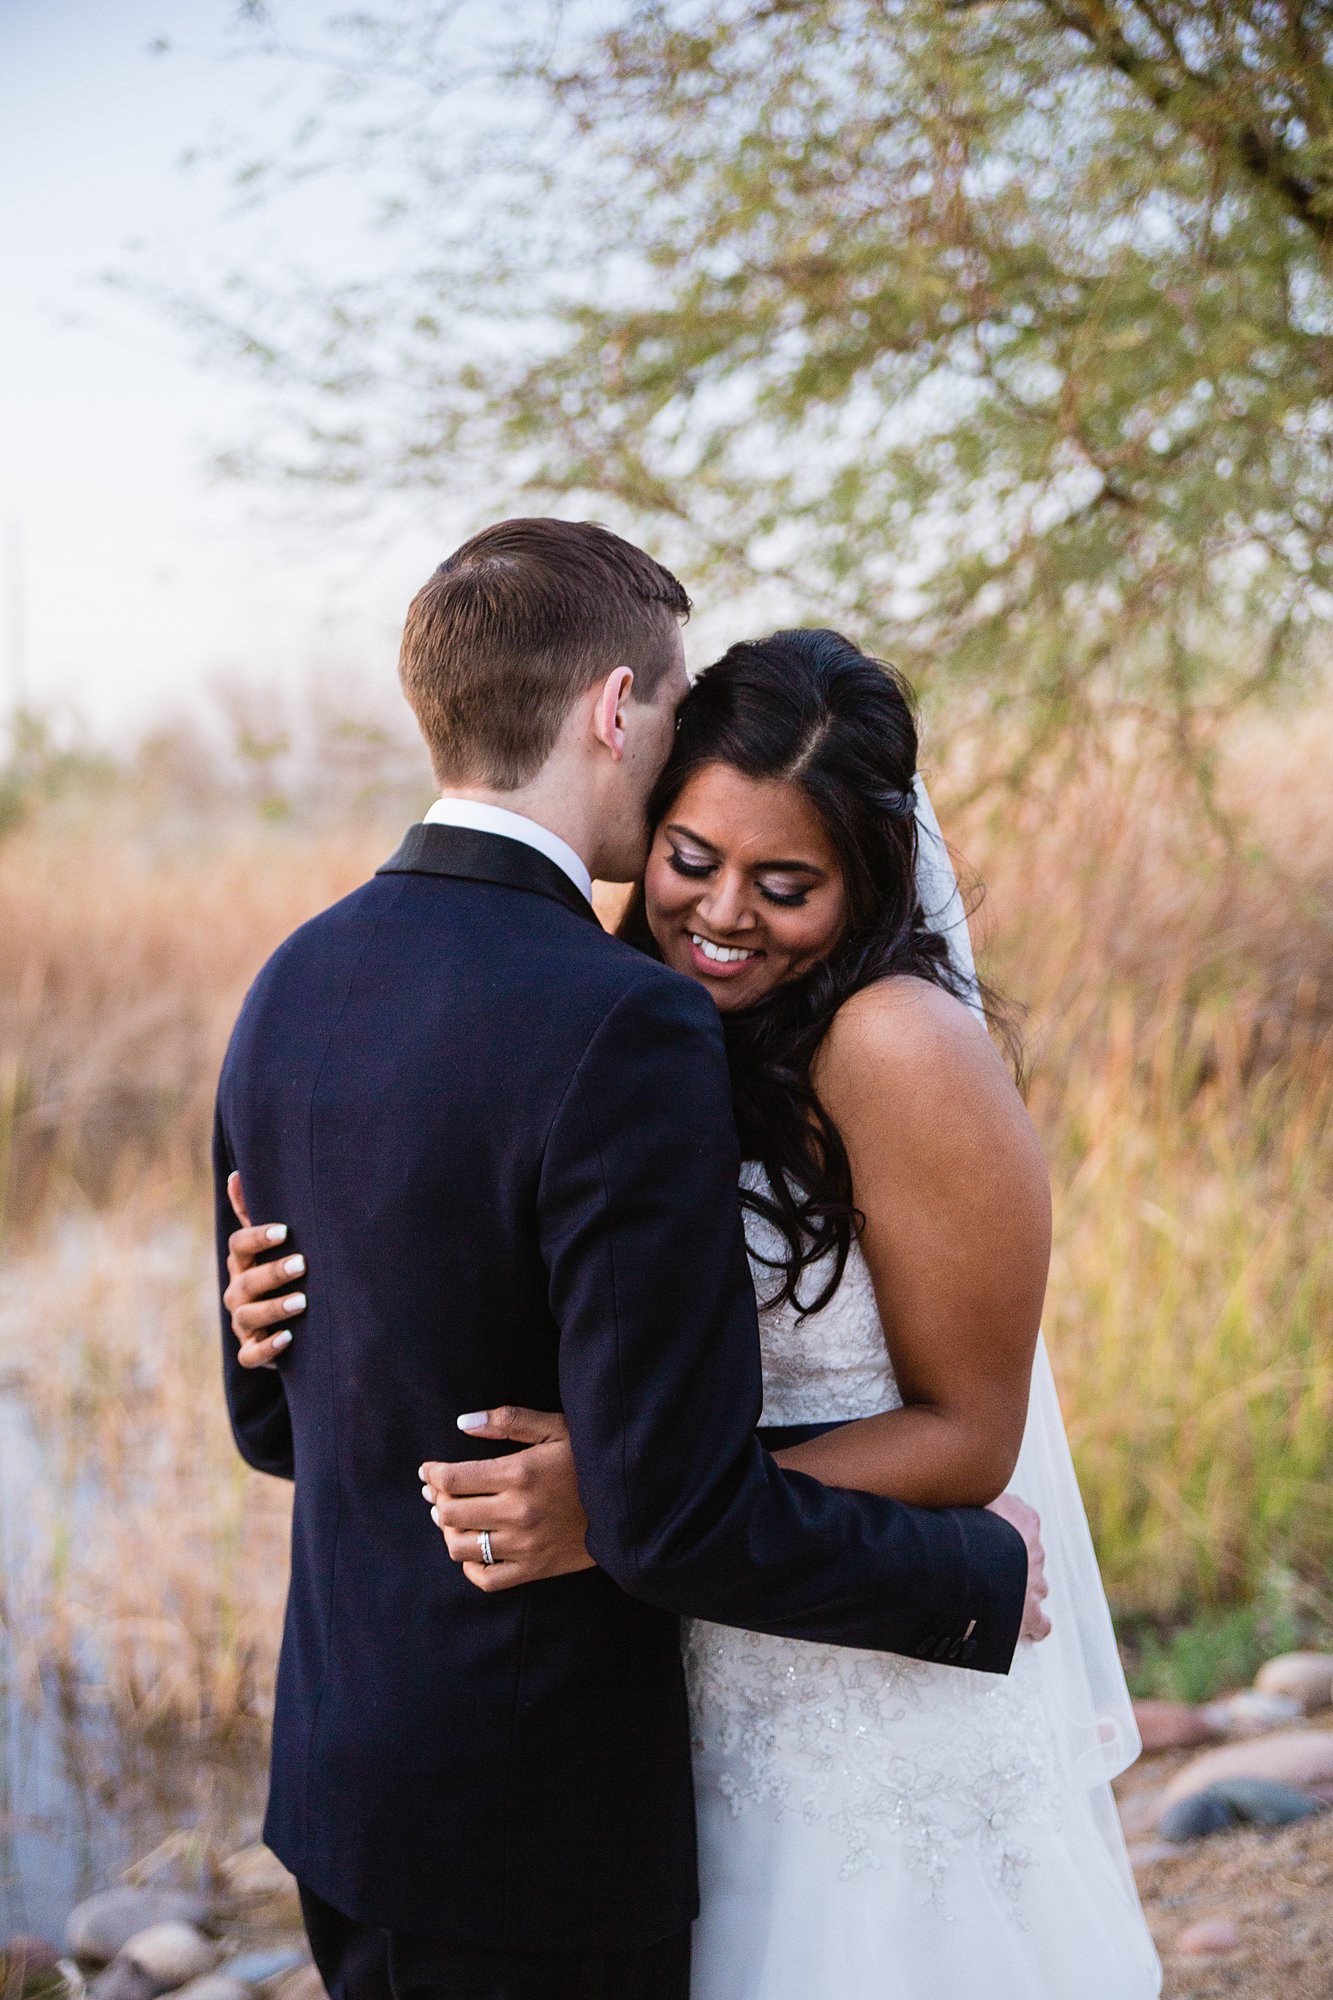 Bride reacting to the groom sharing one reason why he loves her on their wedding day.at the Rio Salado Audubon center by Phoenix wedding photographer PMA Photography.